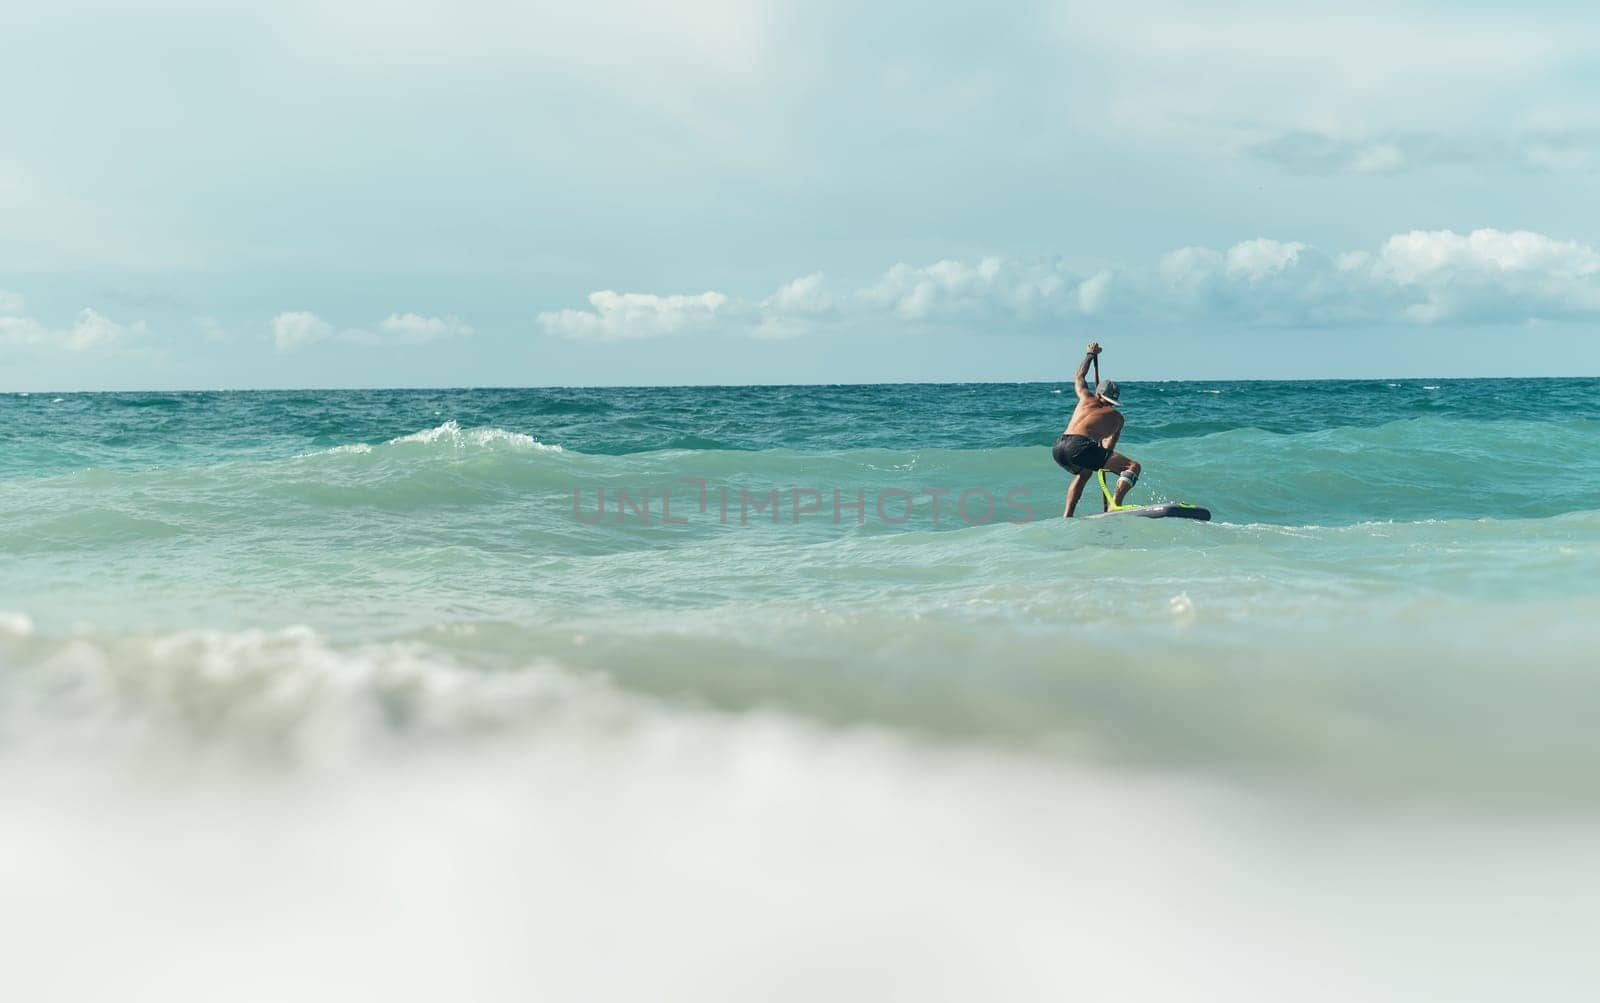 athletic wiry surfer guy swims with a paddle on a sup board in the sea